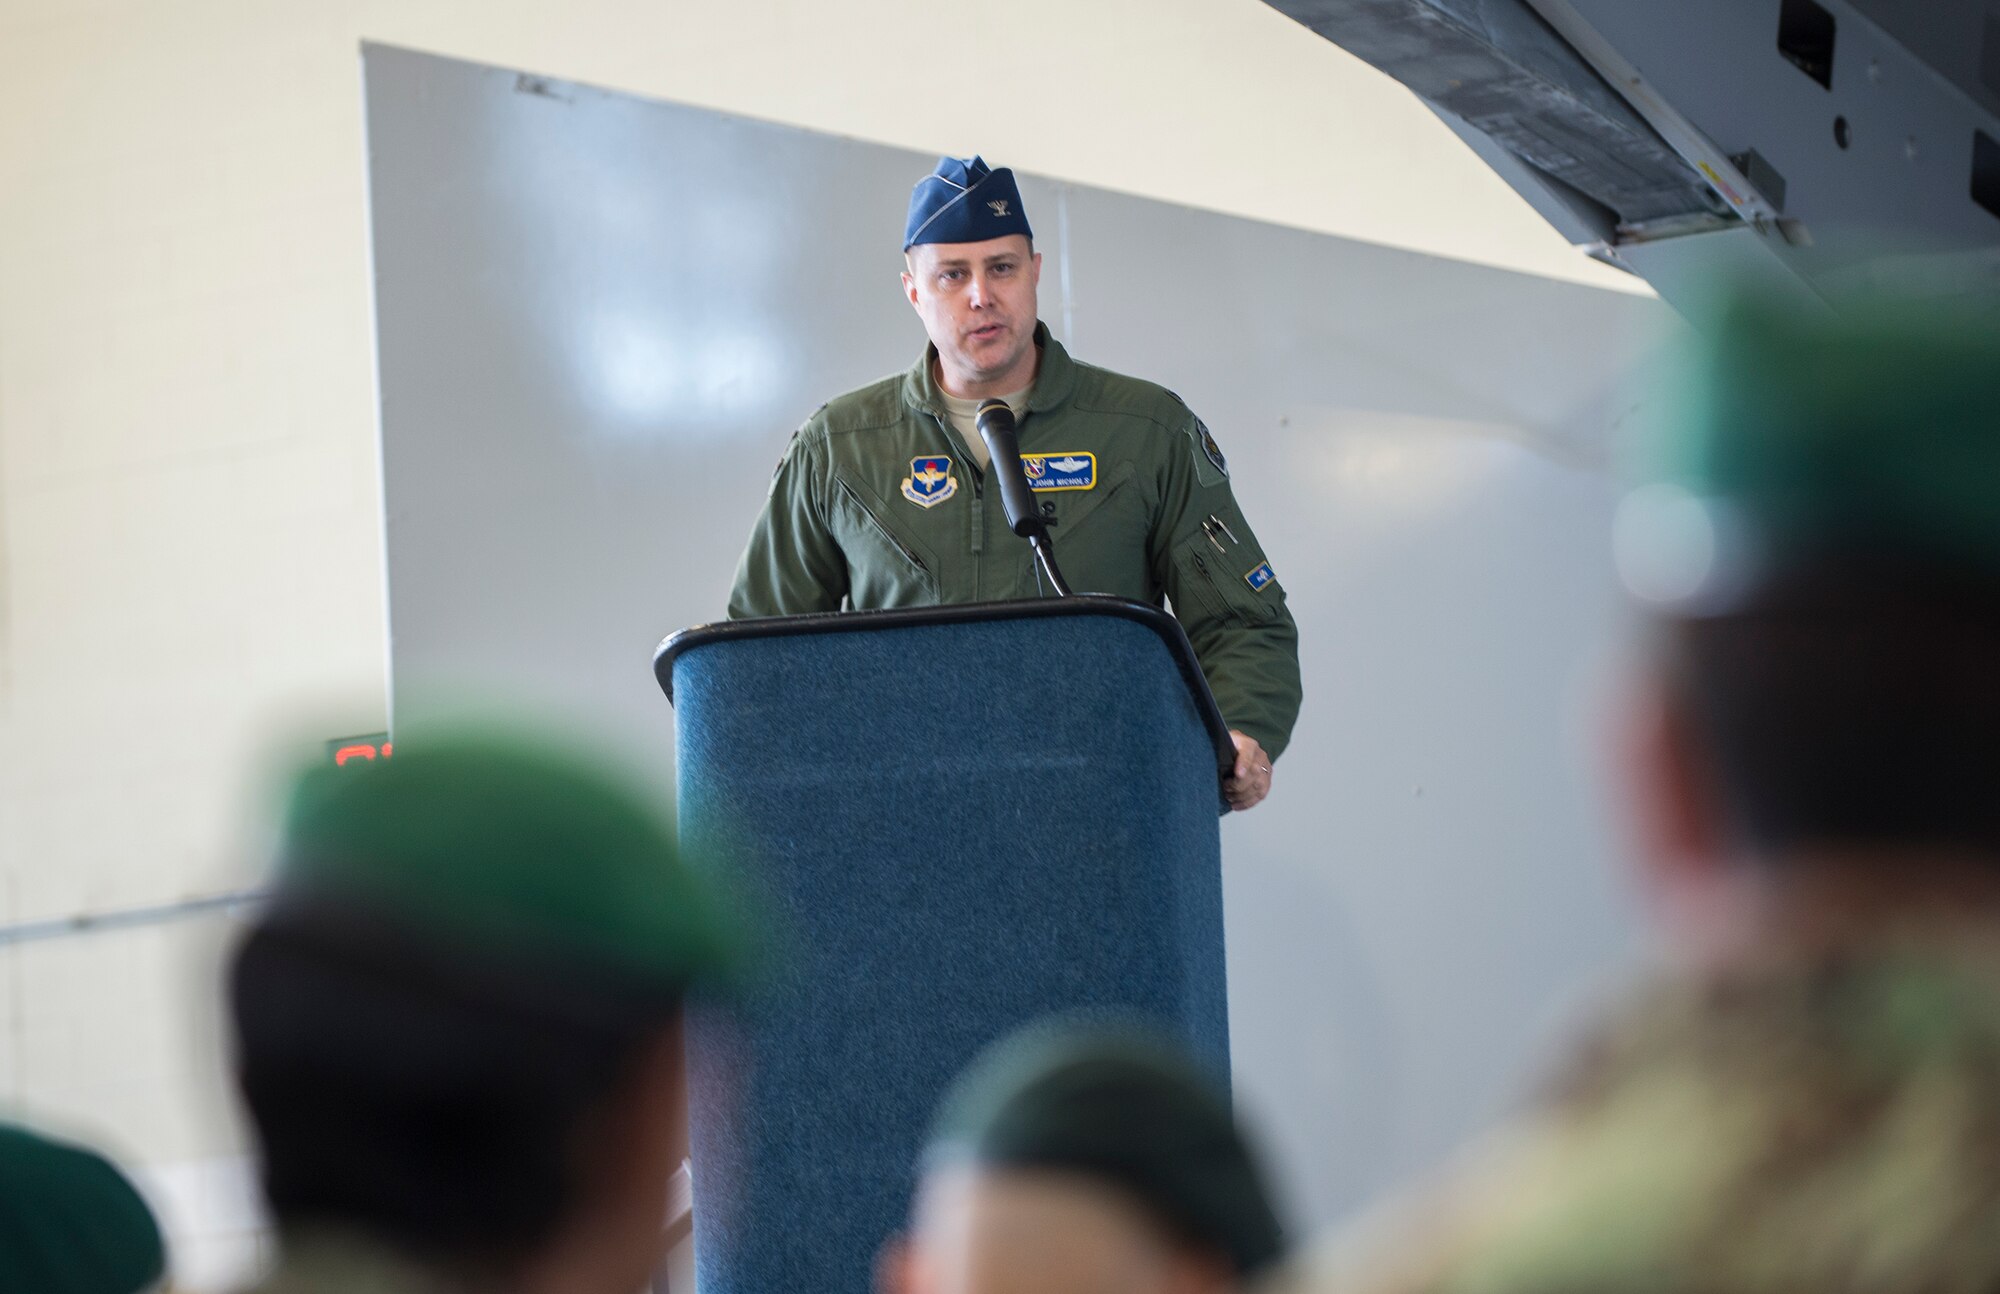 Col. John Nichols, the 14th Flying Training Wing commander, speaks during the graduation of the first 81st Fighter Squadron’s student pilot class Dec. 18, 2015, at Moody Air Force Base, Ga. The Afghan air force pilots began their classroom training in February 2015 and launched on their first A-29 Super Tucano training sorties in March 2015. (U.S. Air Force photo/Senior Airman Ceaira Tinsley)